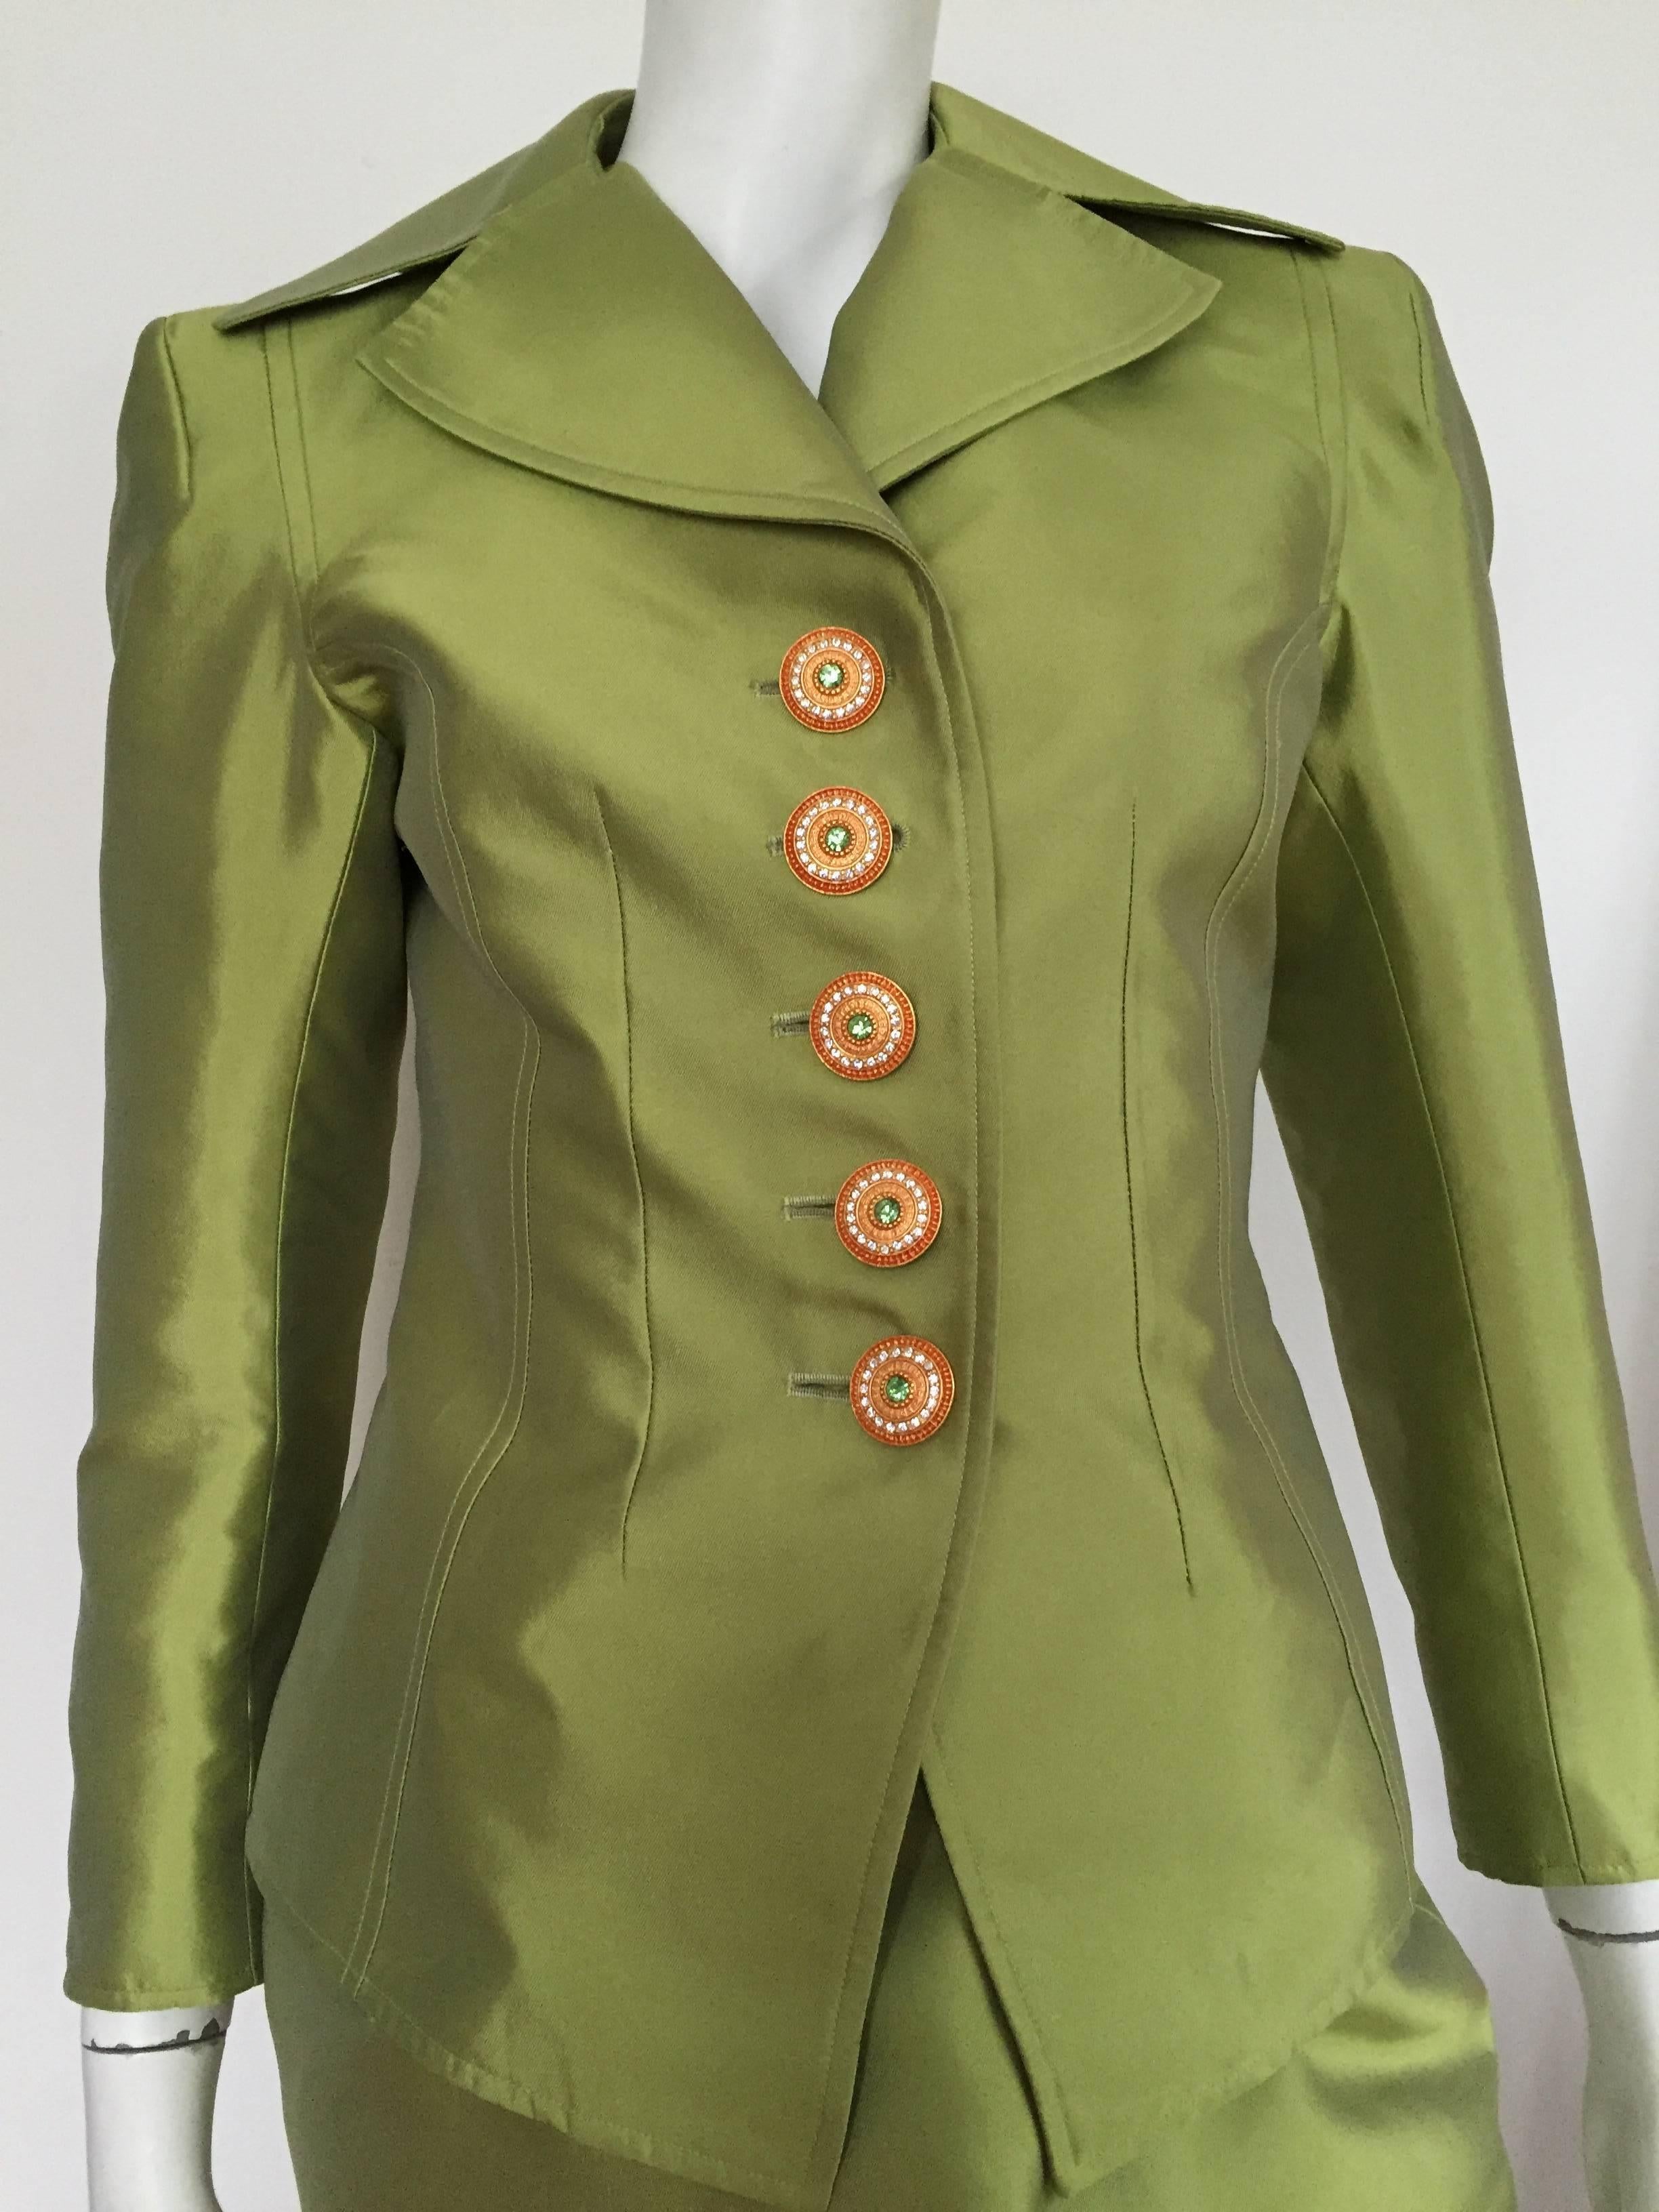 Christian Lacroix 1980s silk sage green skirt suit French size 38 but fits like an USA size 4 ( Please see & use the measurements I provide so that you can make sure this suit will fit you like Lacroix wants it to). Gold rhinestone encrusted buttons